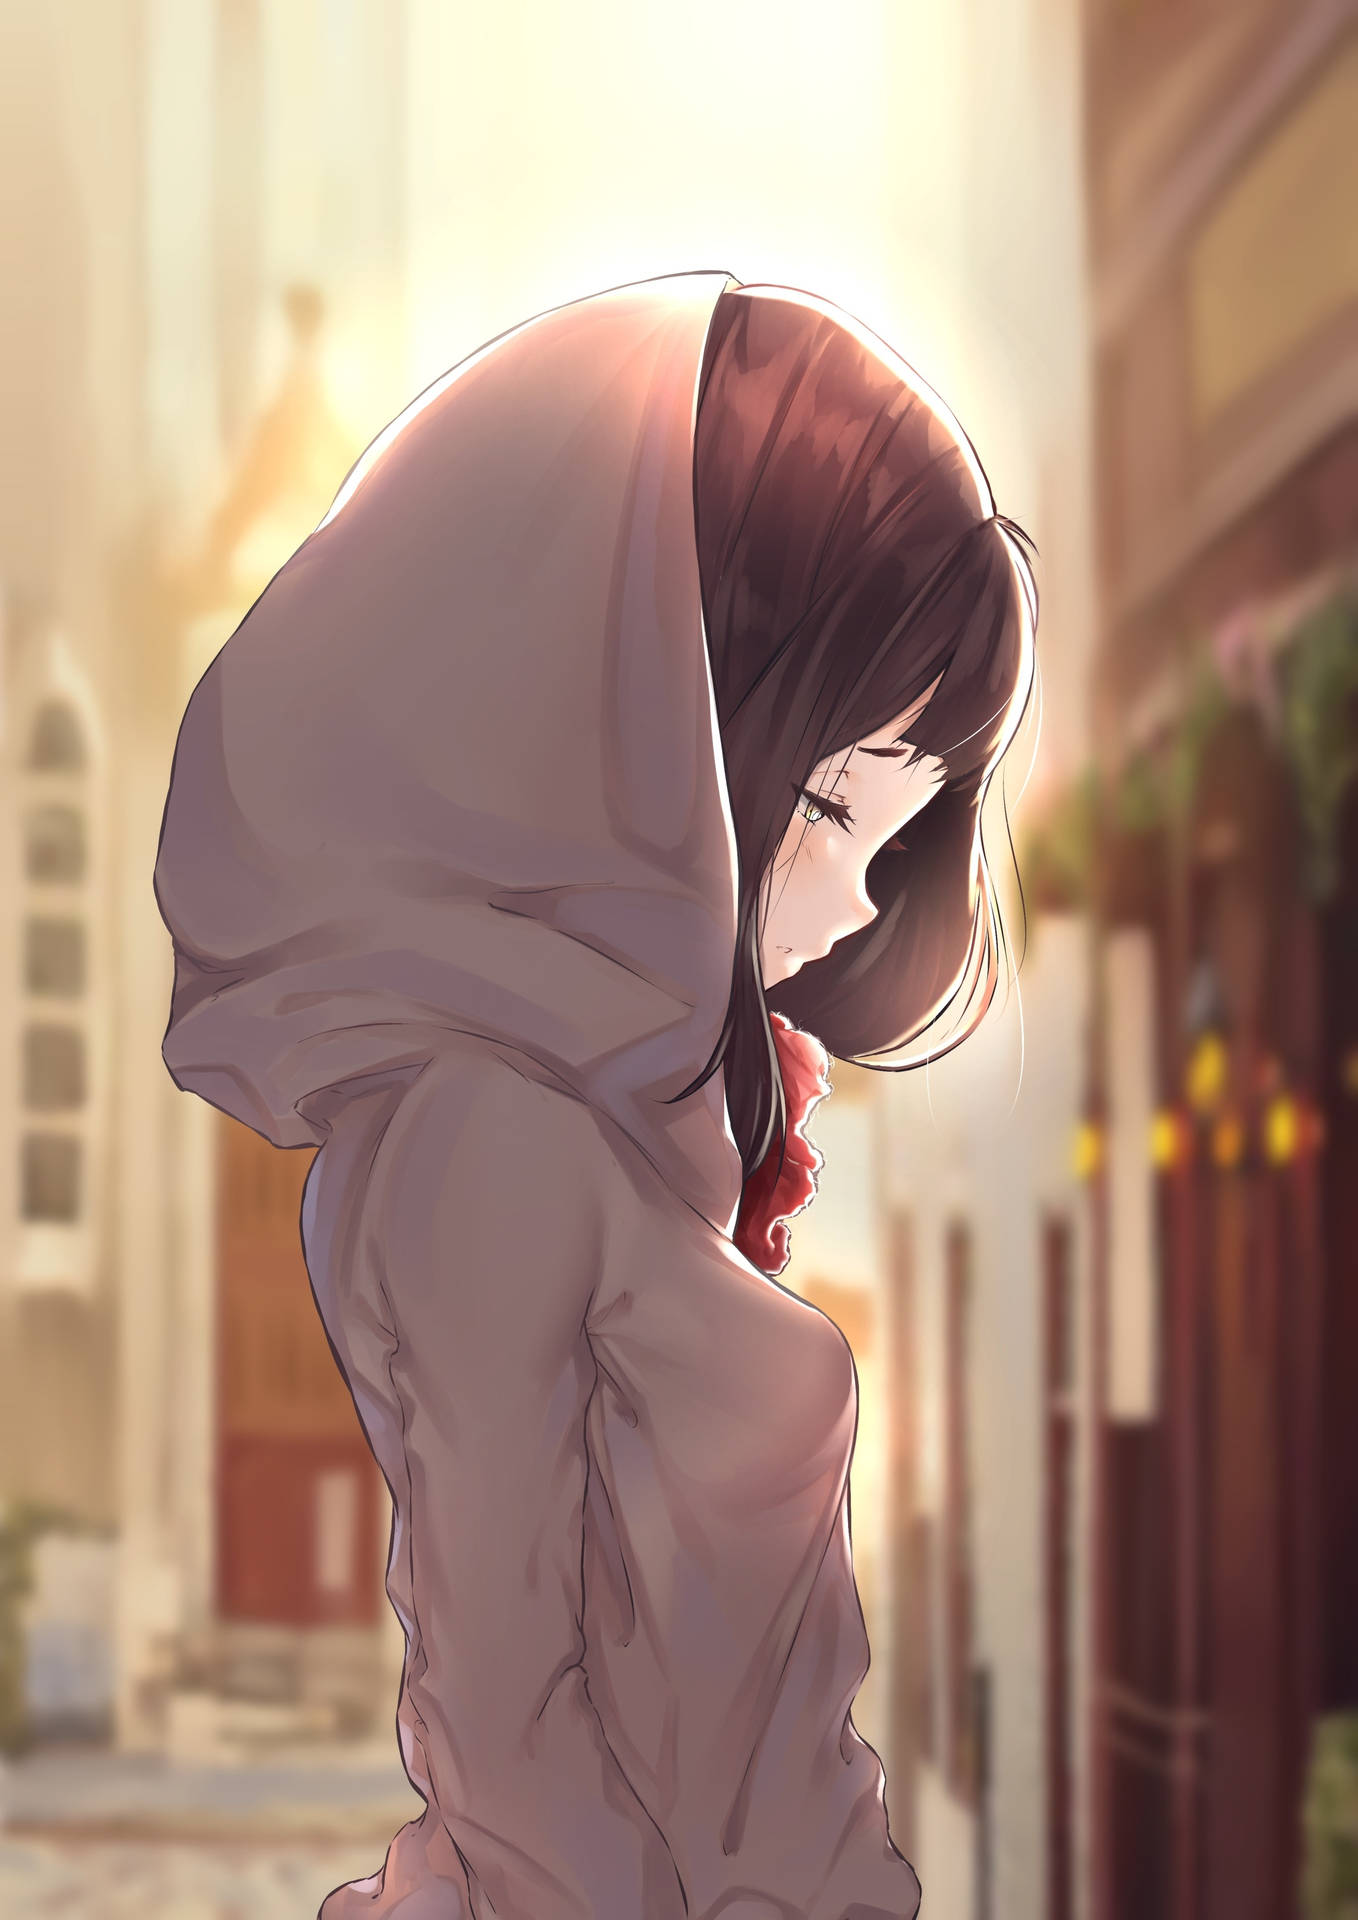 Lonely Anime Girl Hoodie Wallpaper